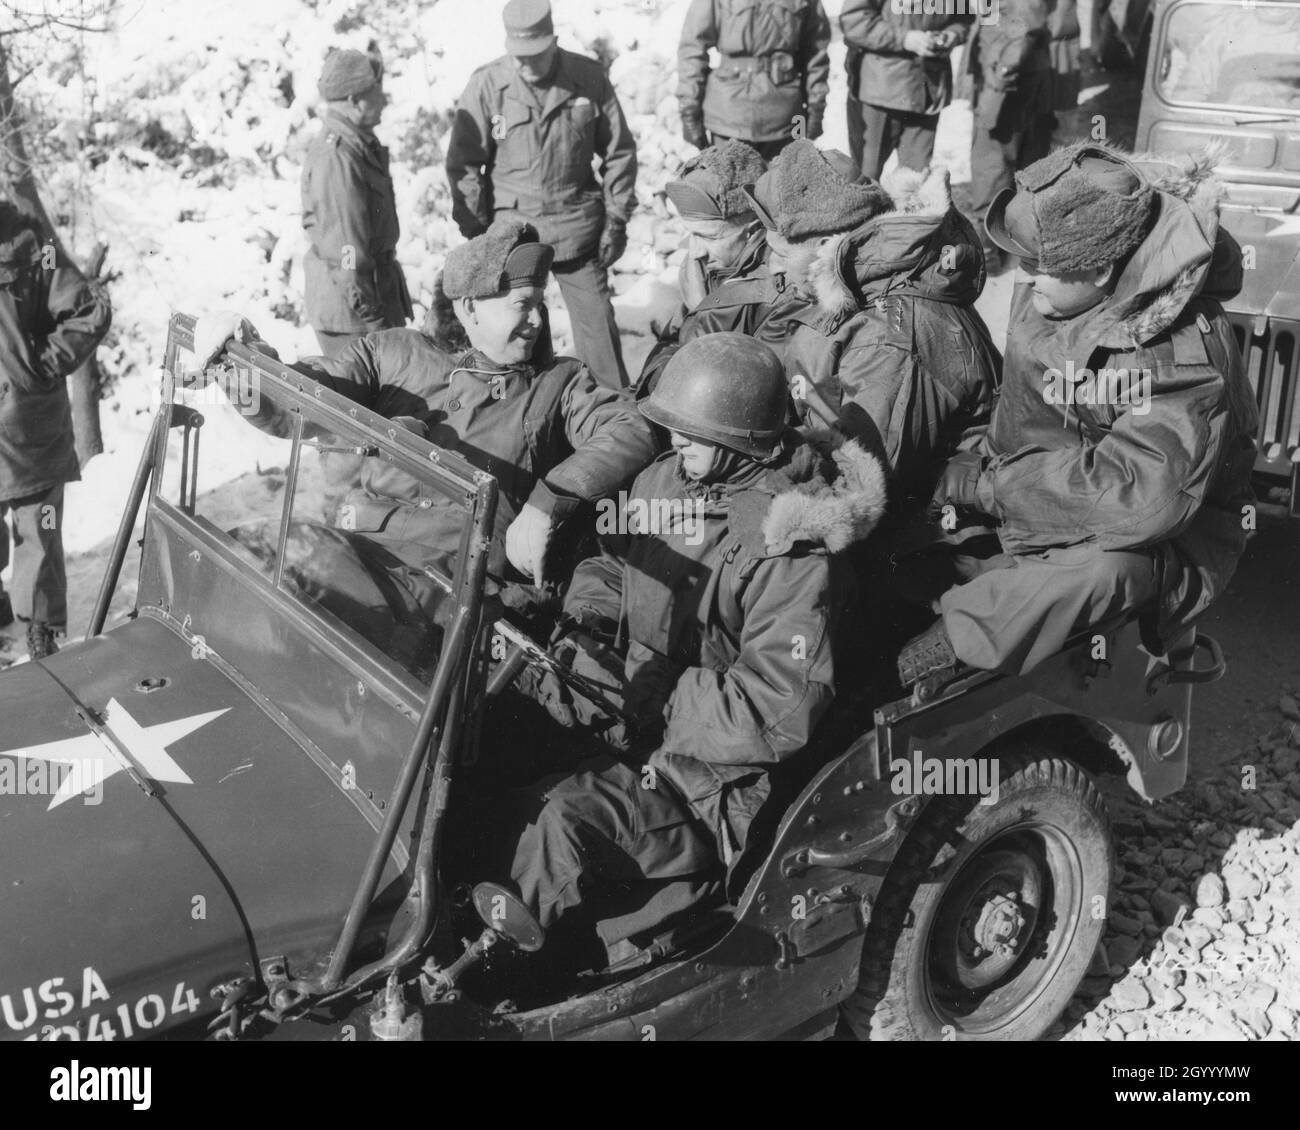 President-elect Dwight D. Eisenhower (front seat, left); General Mark W. Clark, Commander-in-Chief, United Nations Command (back seat, center), and members of their party begin a tour of installations in a jeep at the headquarters of the 2nd US Inf. Division. Korea, 12-5-52. Stock Photo